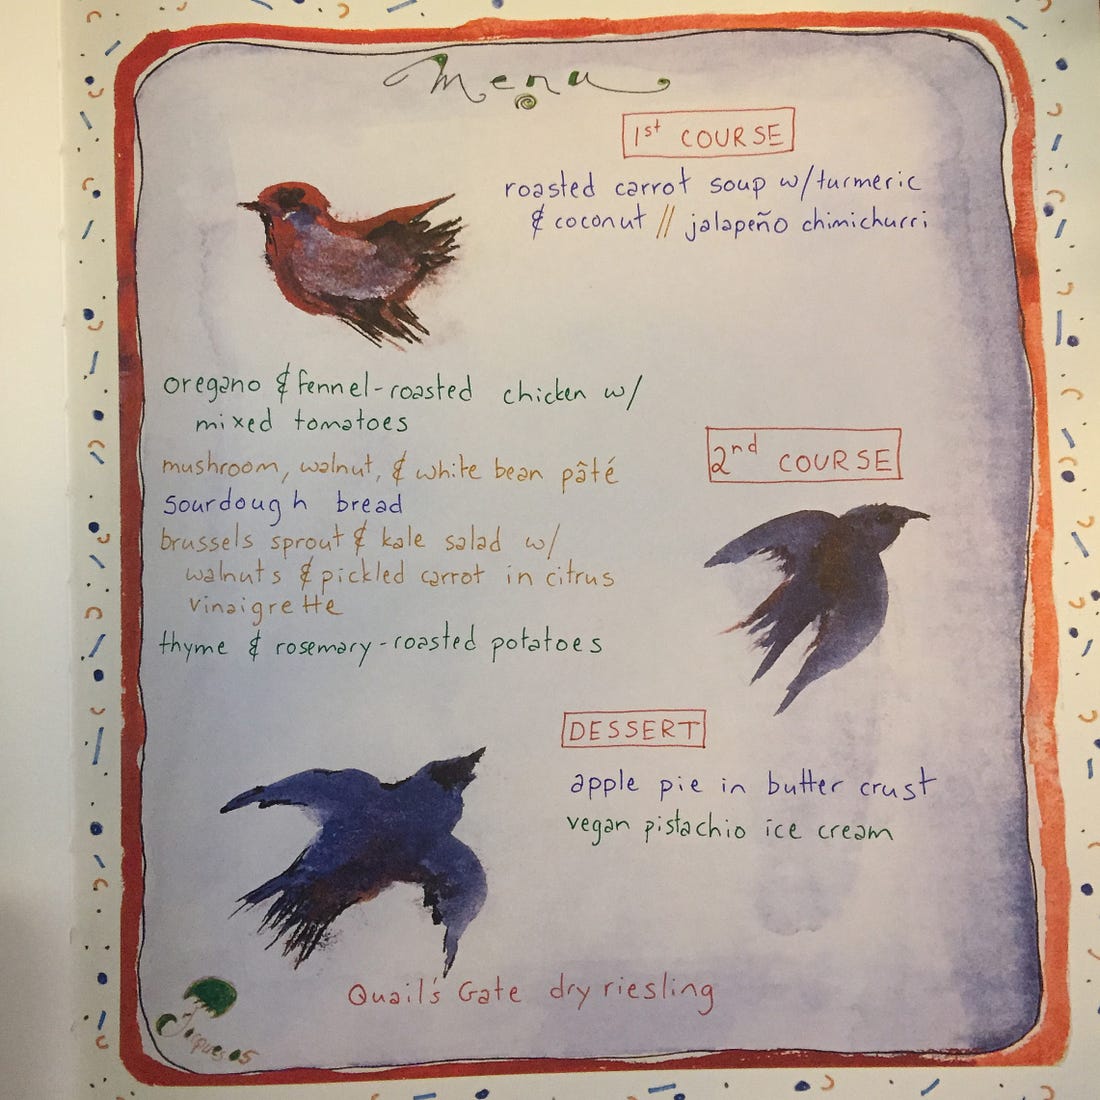 A menu book with painted birds and a handwritten menu for Thanksgiving dinner. All the dishes listed are discussed below.